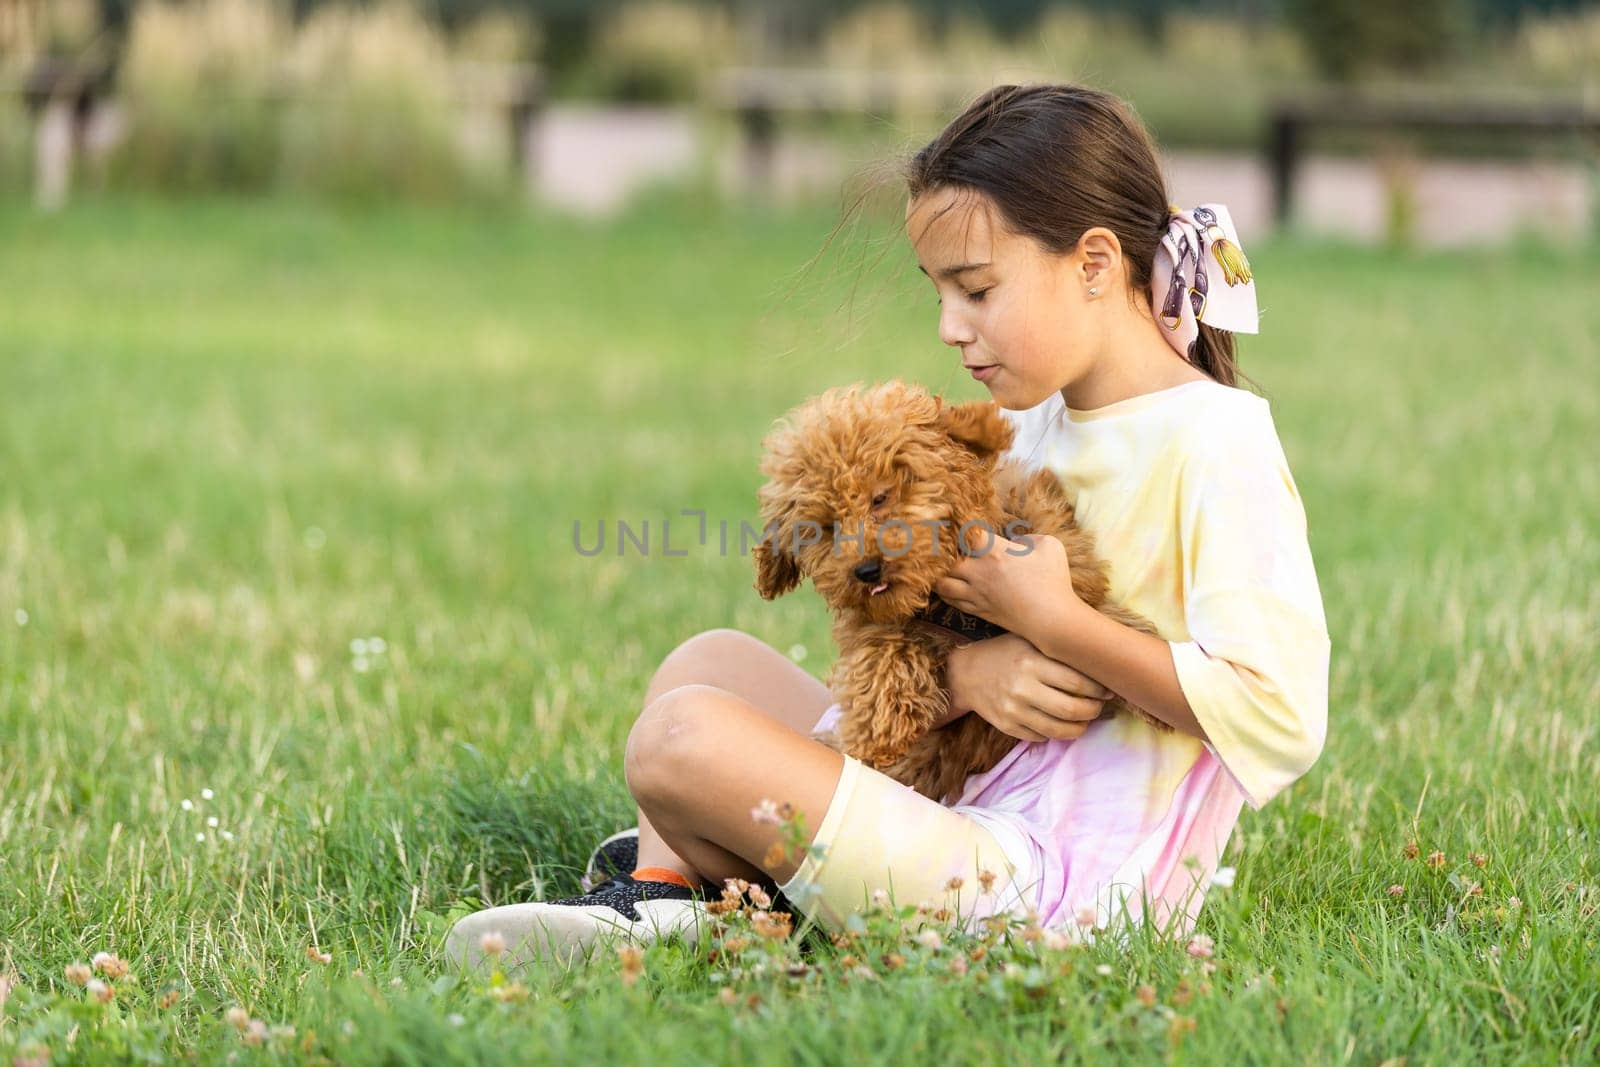 a little girl playing with her maltipoo dog a maltese-poodle breed by Andelov13